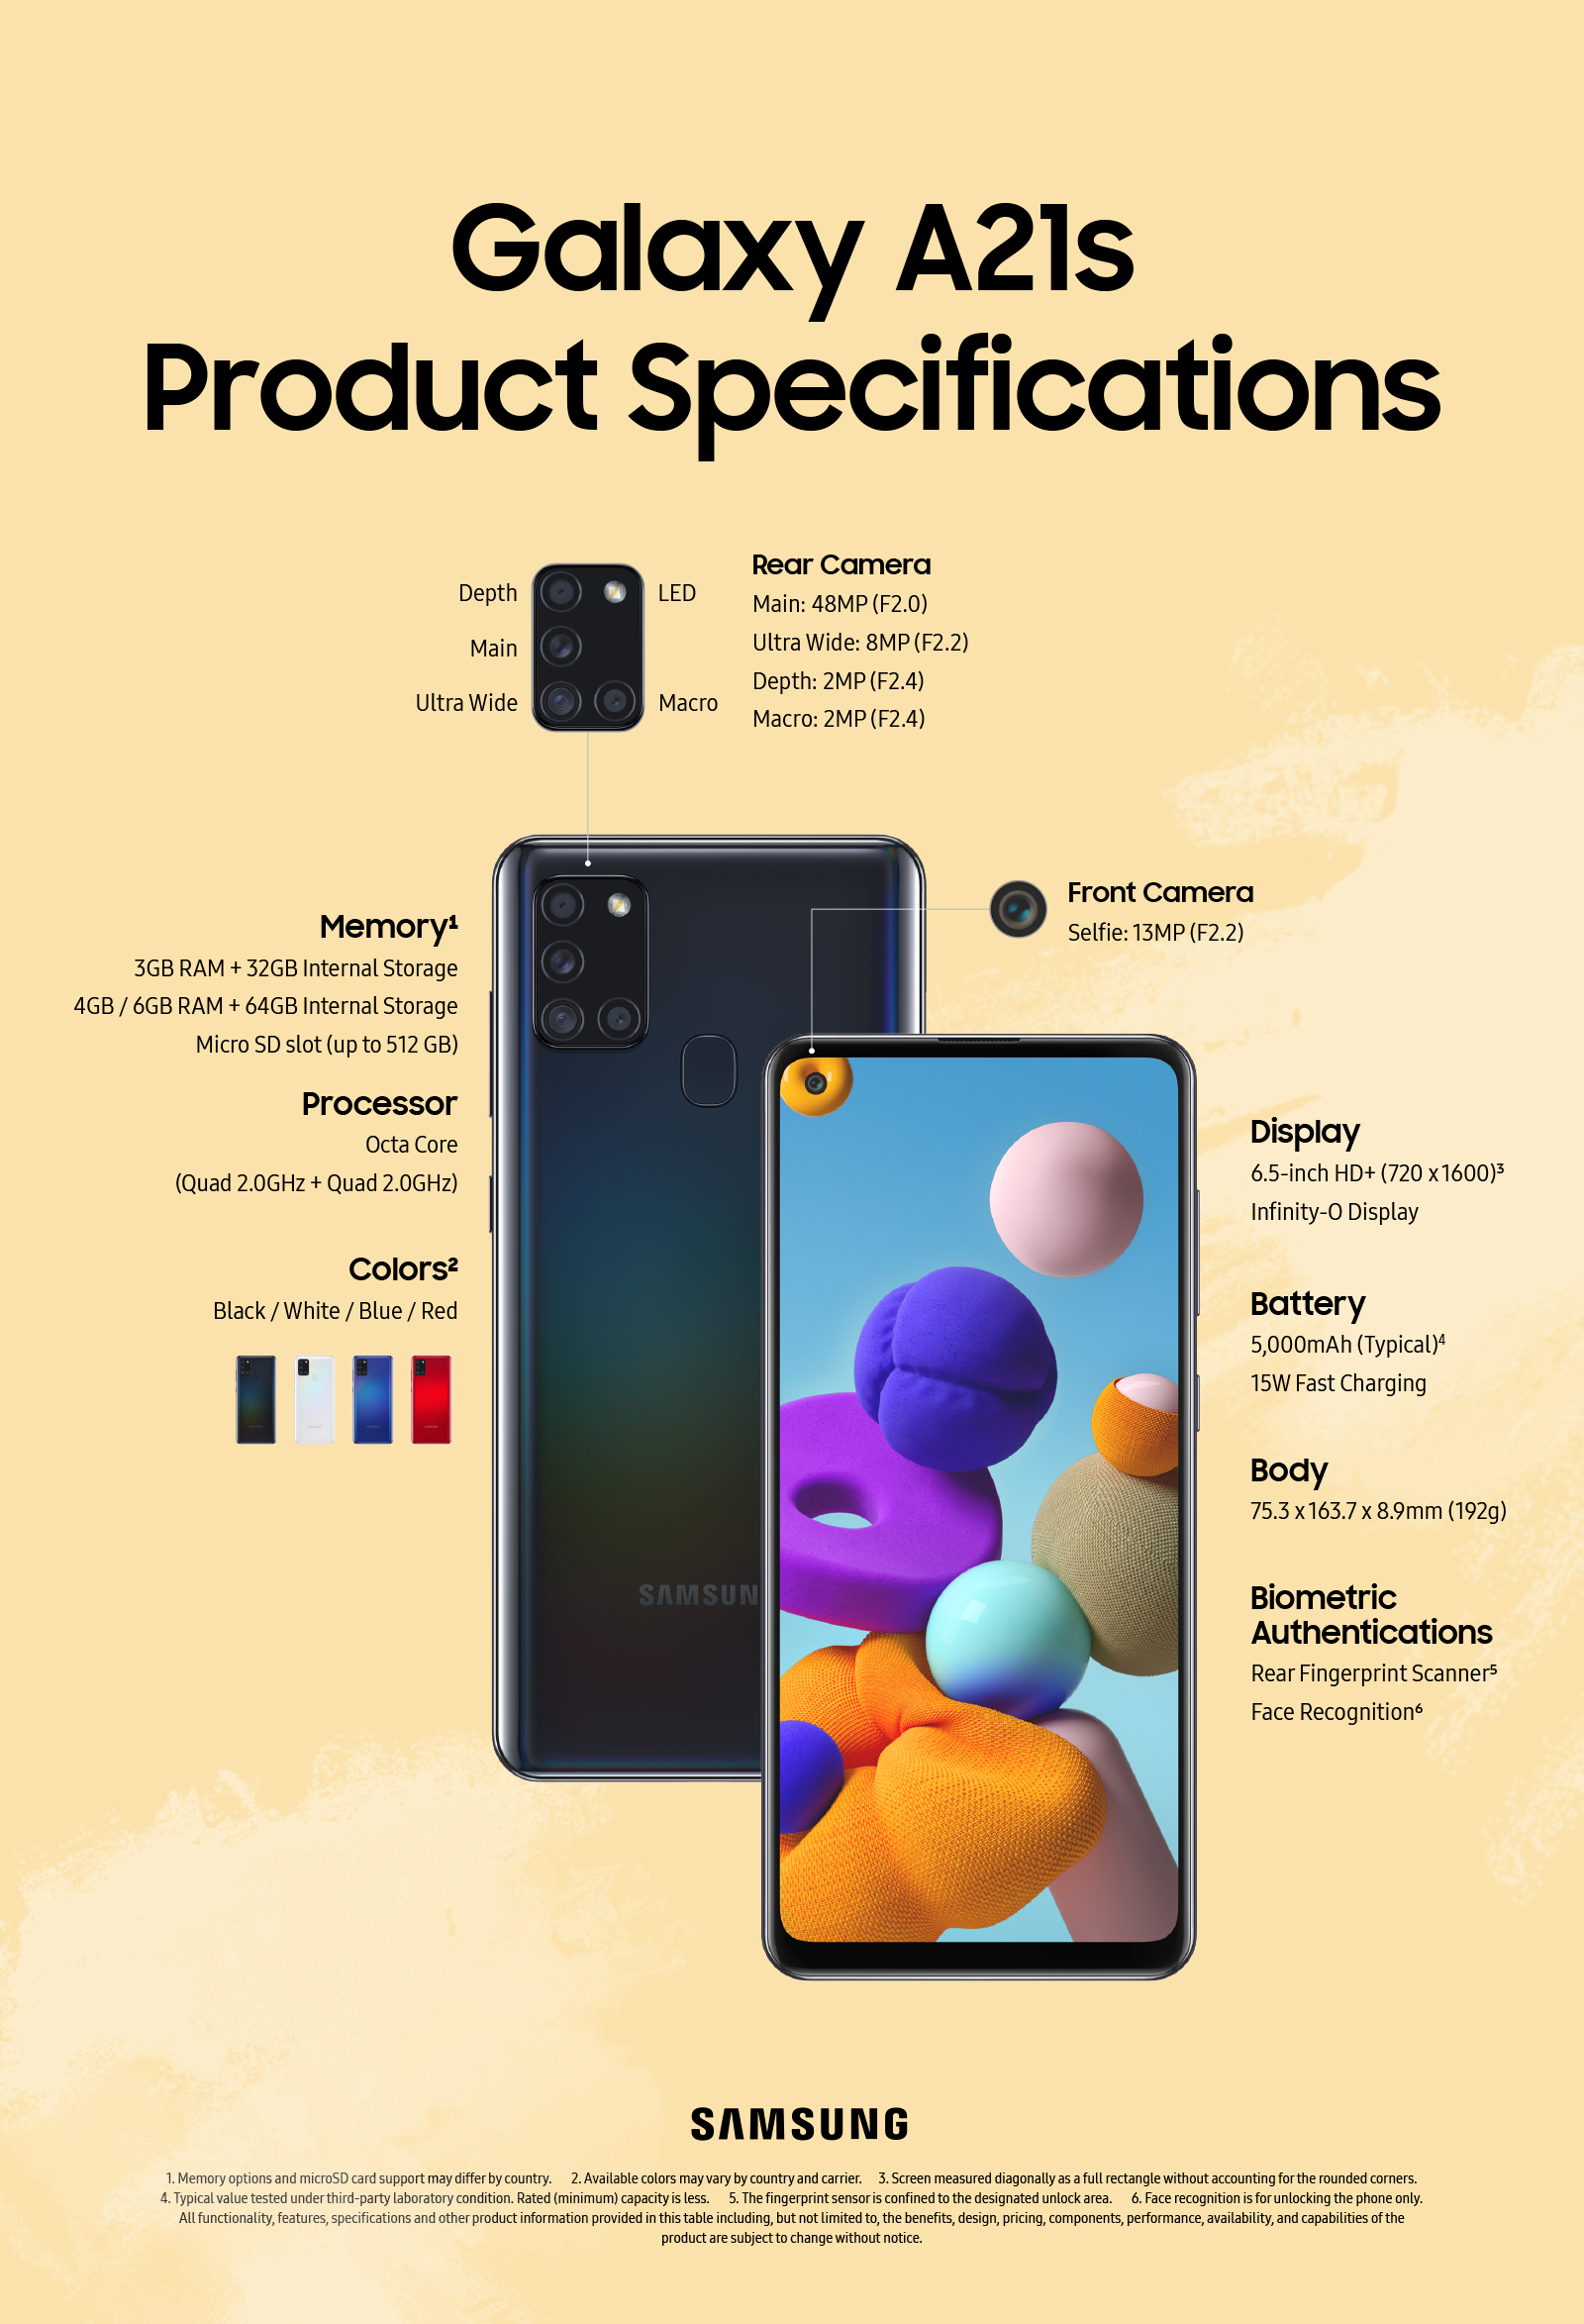 galaxya21s_product_specification.jpg